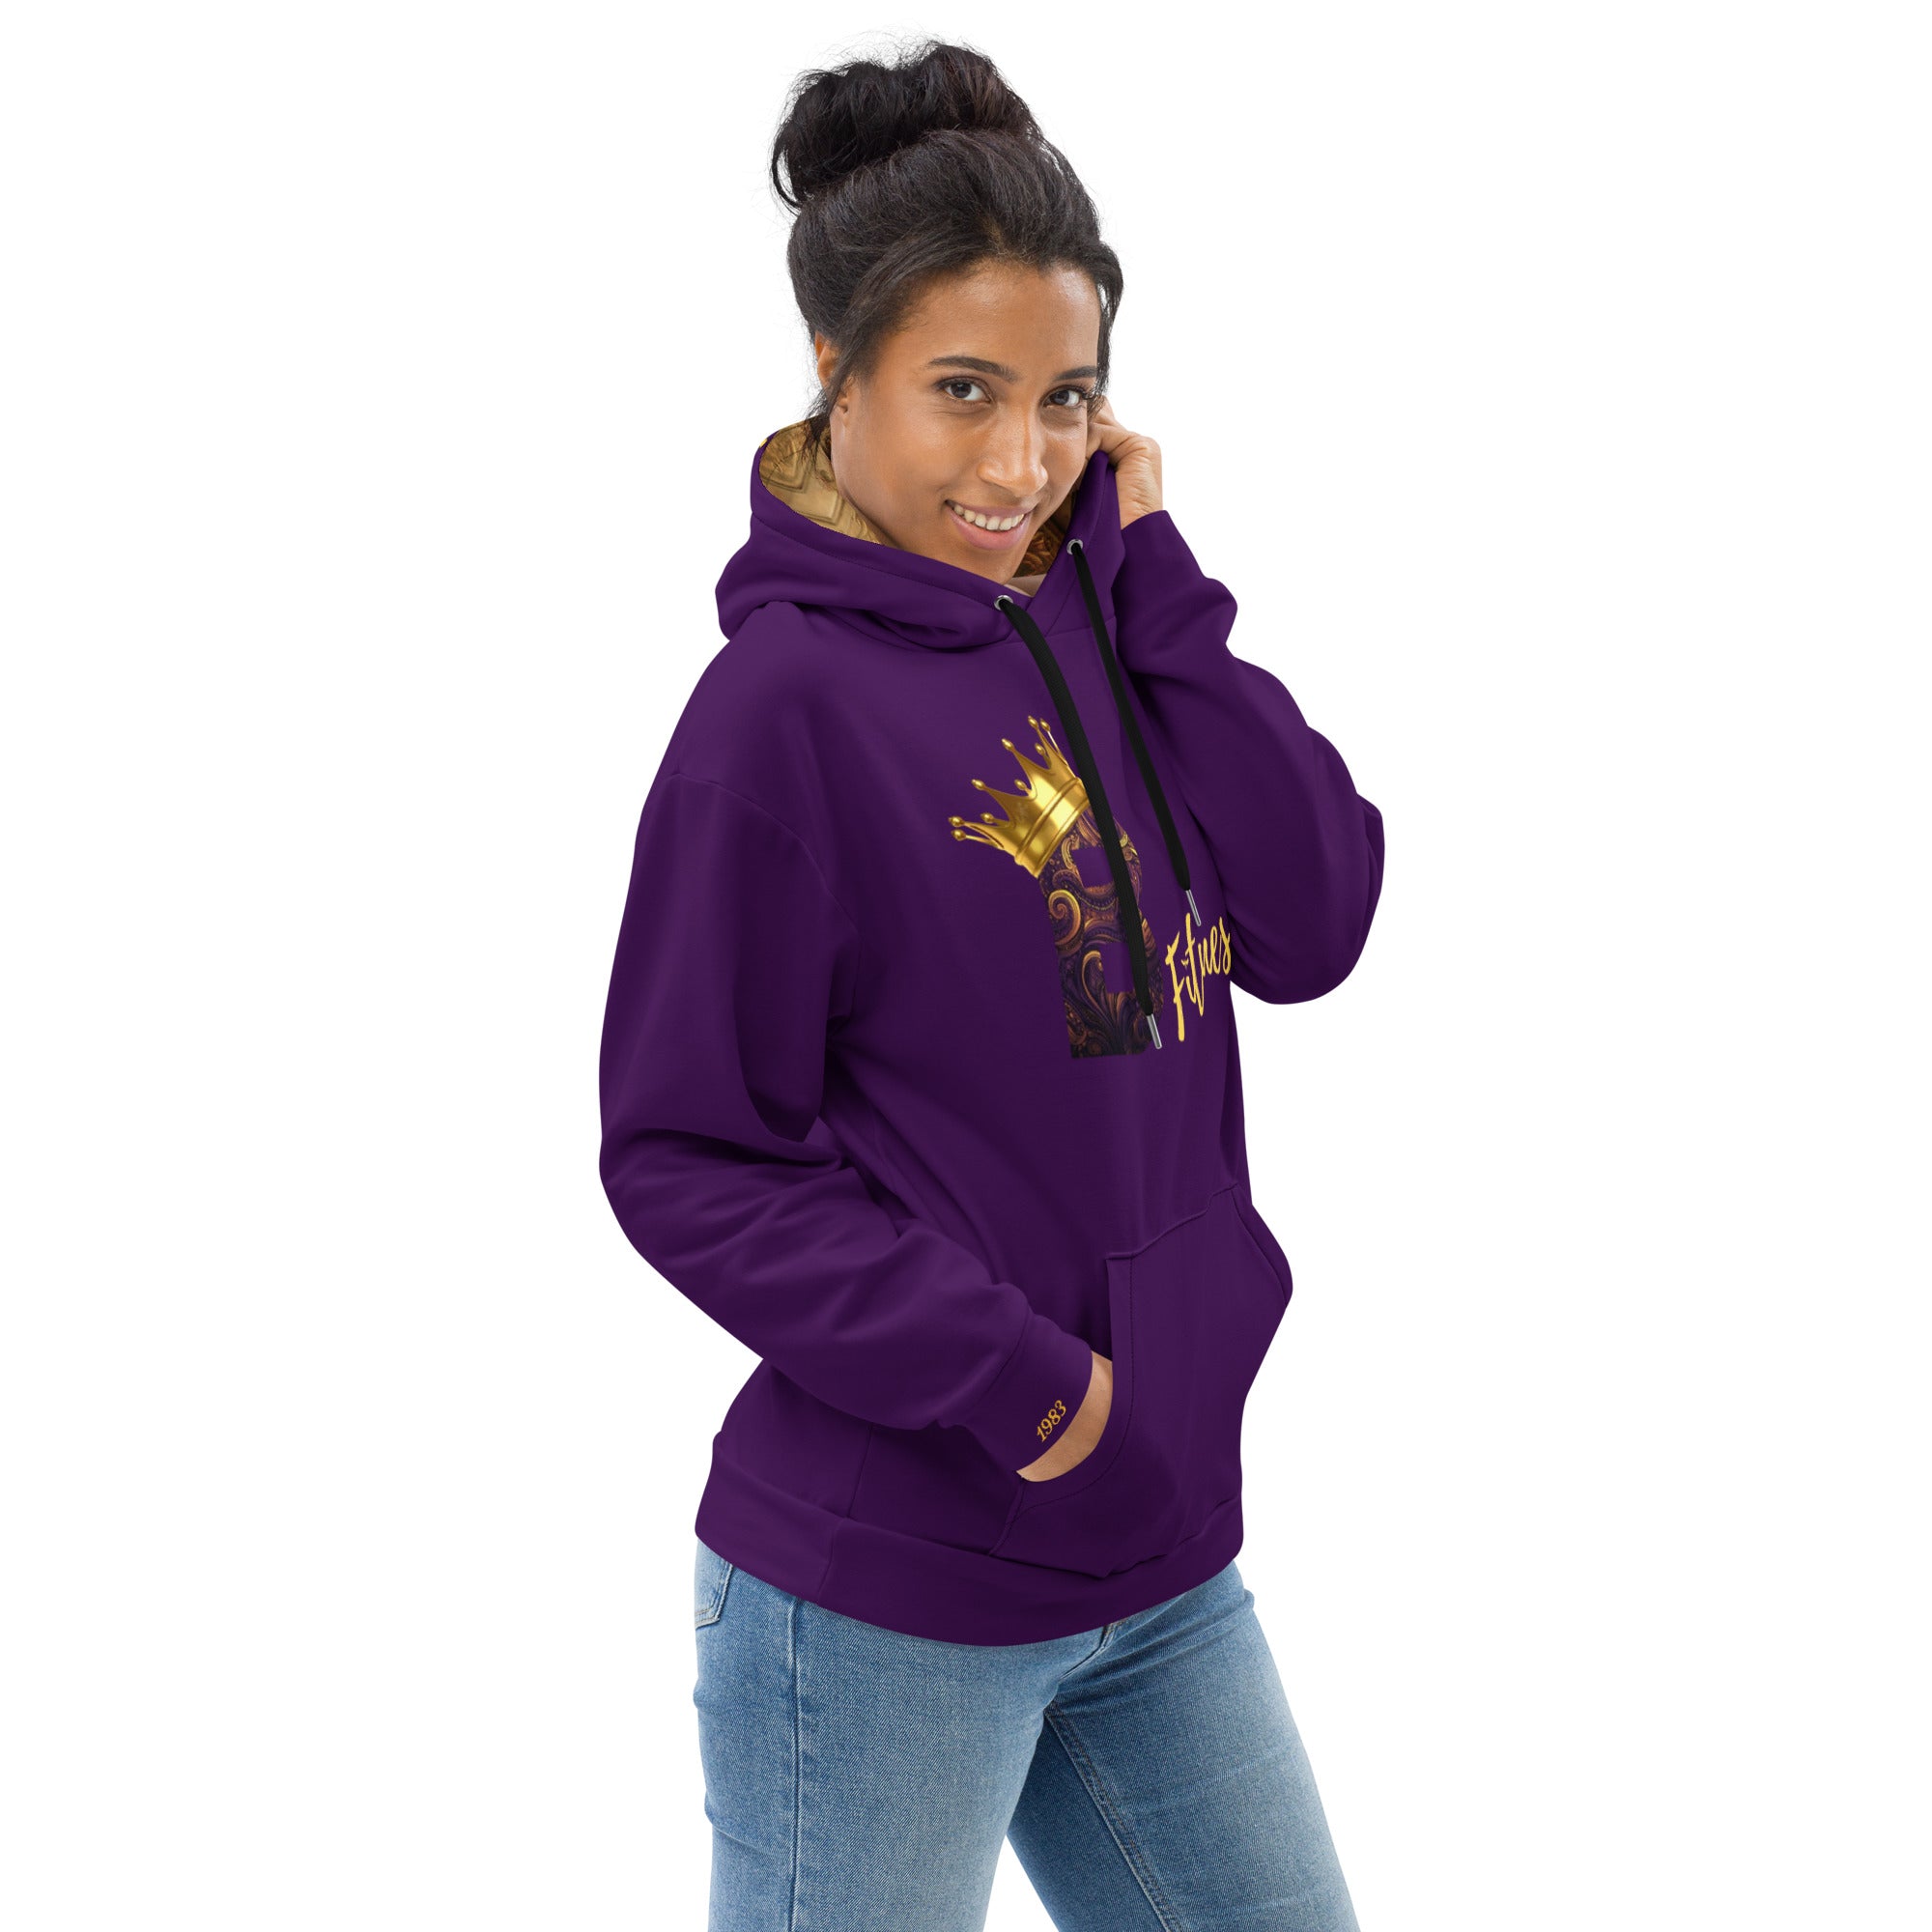 "B Fitness" - Special Edition (Purple) - Hoodie